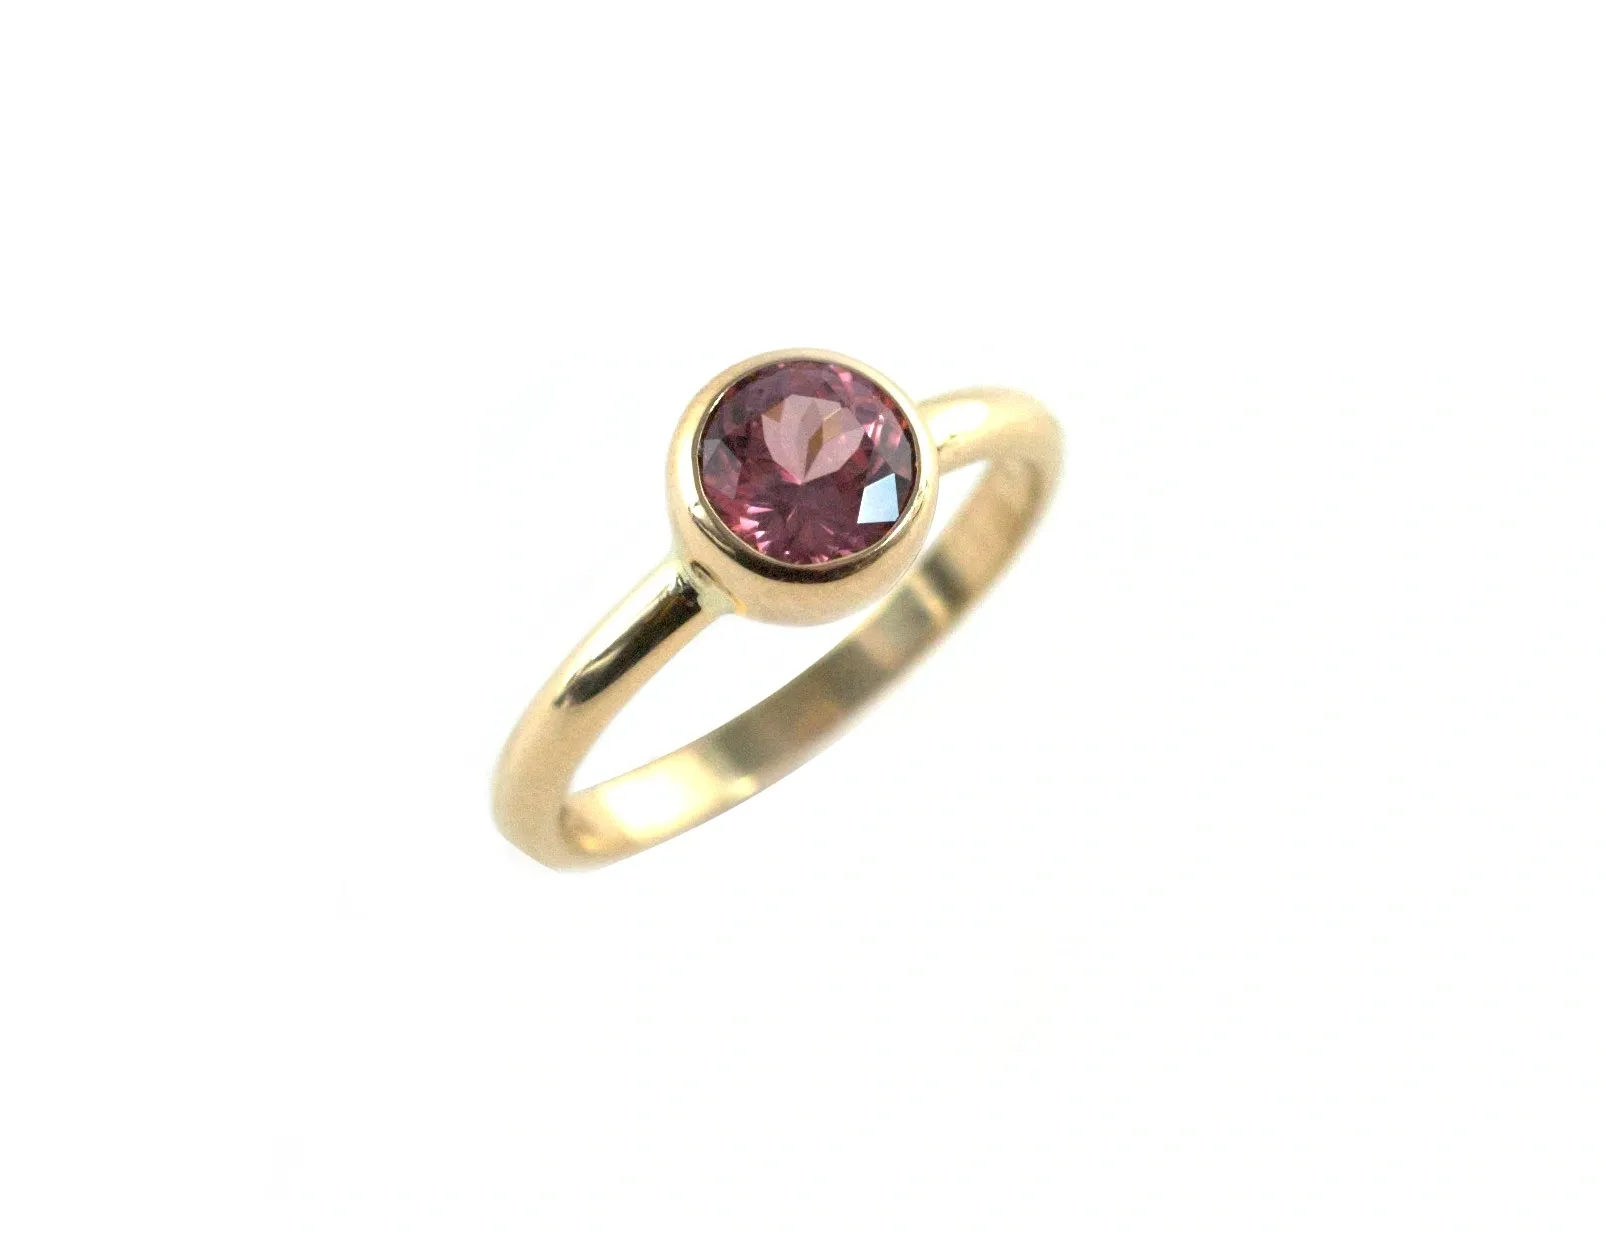 A gold ring with a pink stone on top of it.